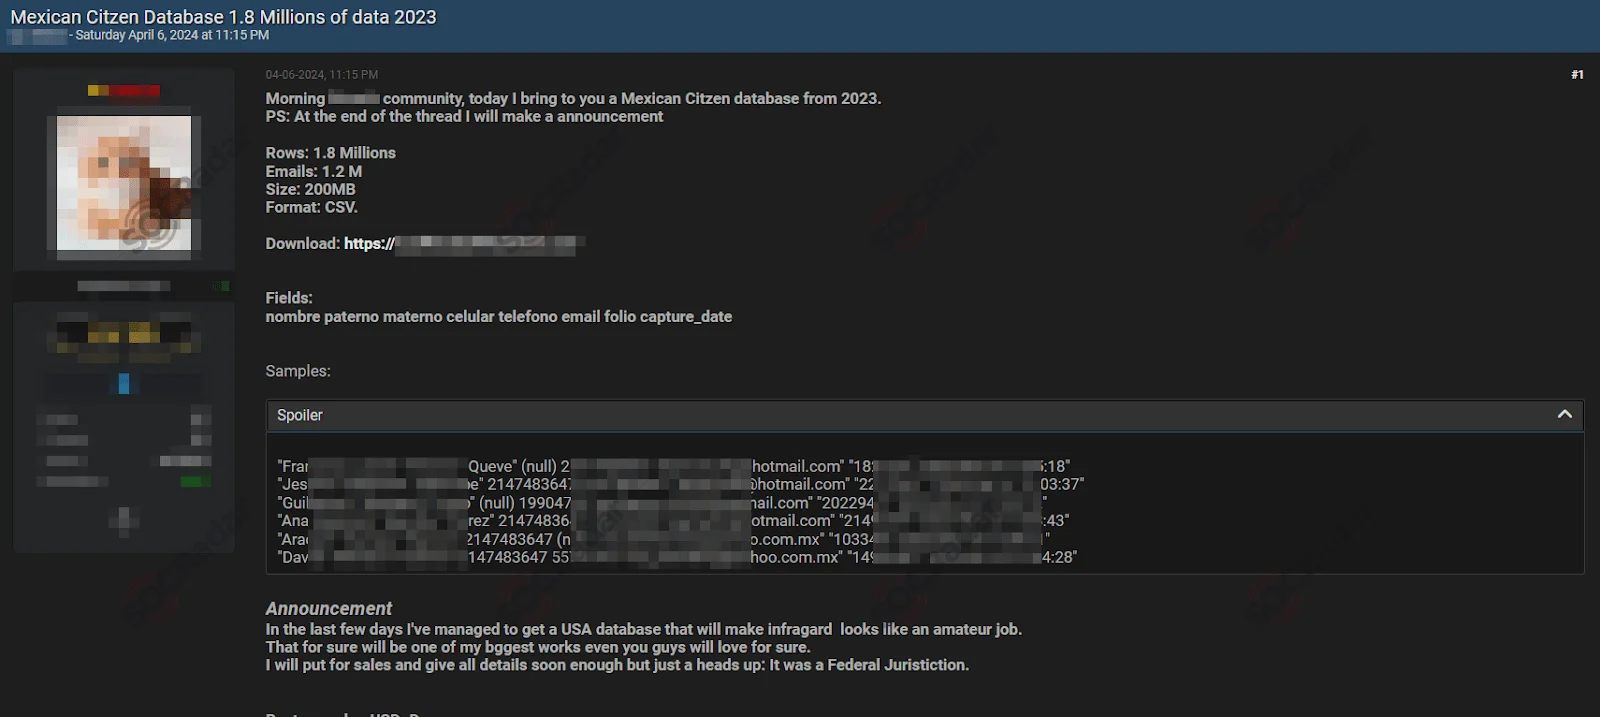 A threat actor detected by SOCRadar claiming to have a dataset of Mexican citizens